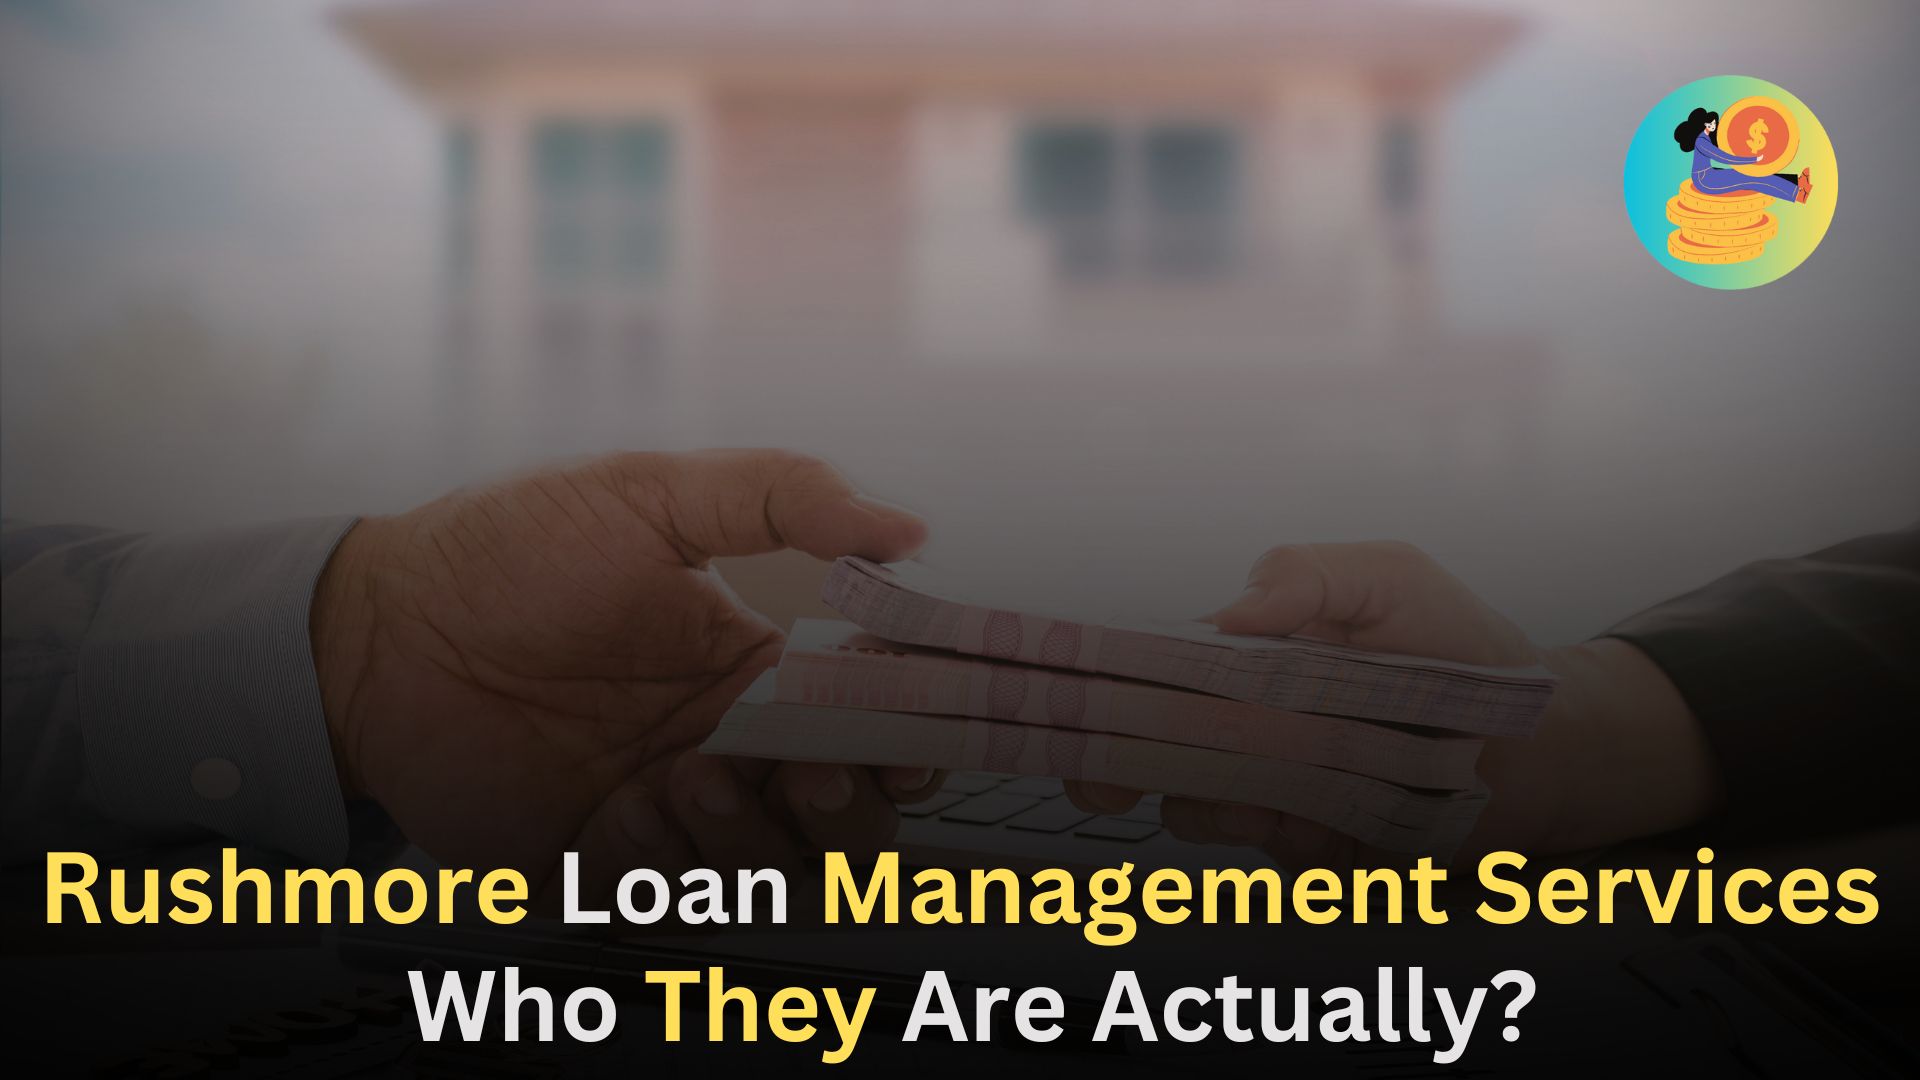 Rushmore Loan Management Services,Who They Are Actually 